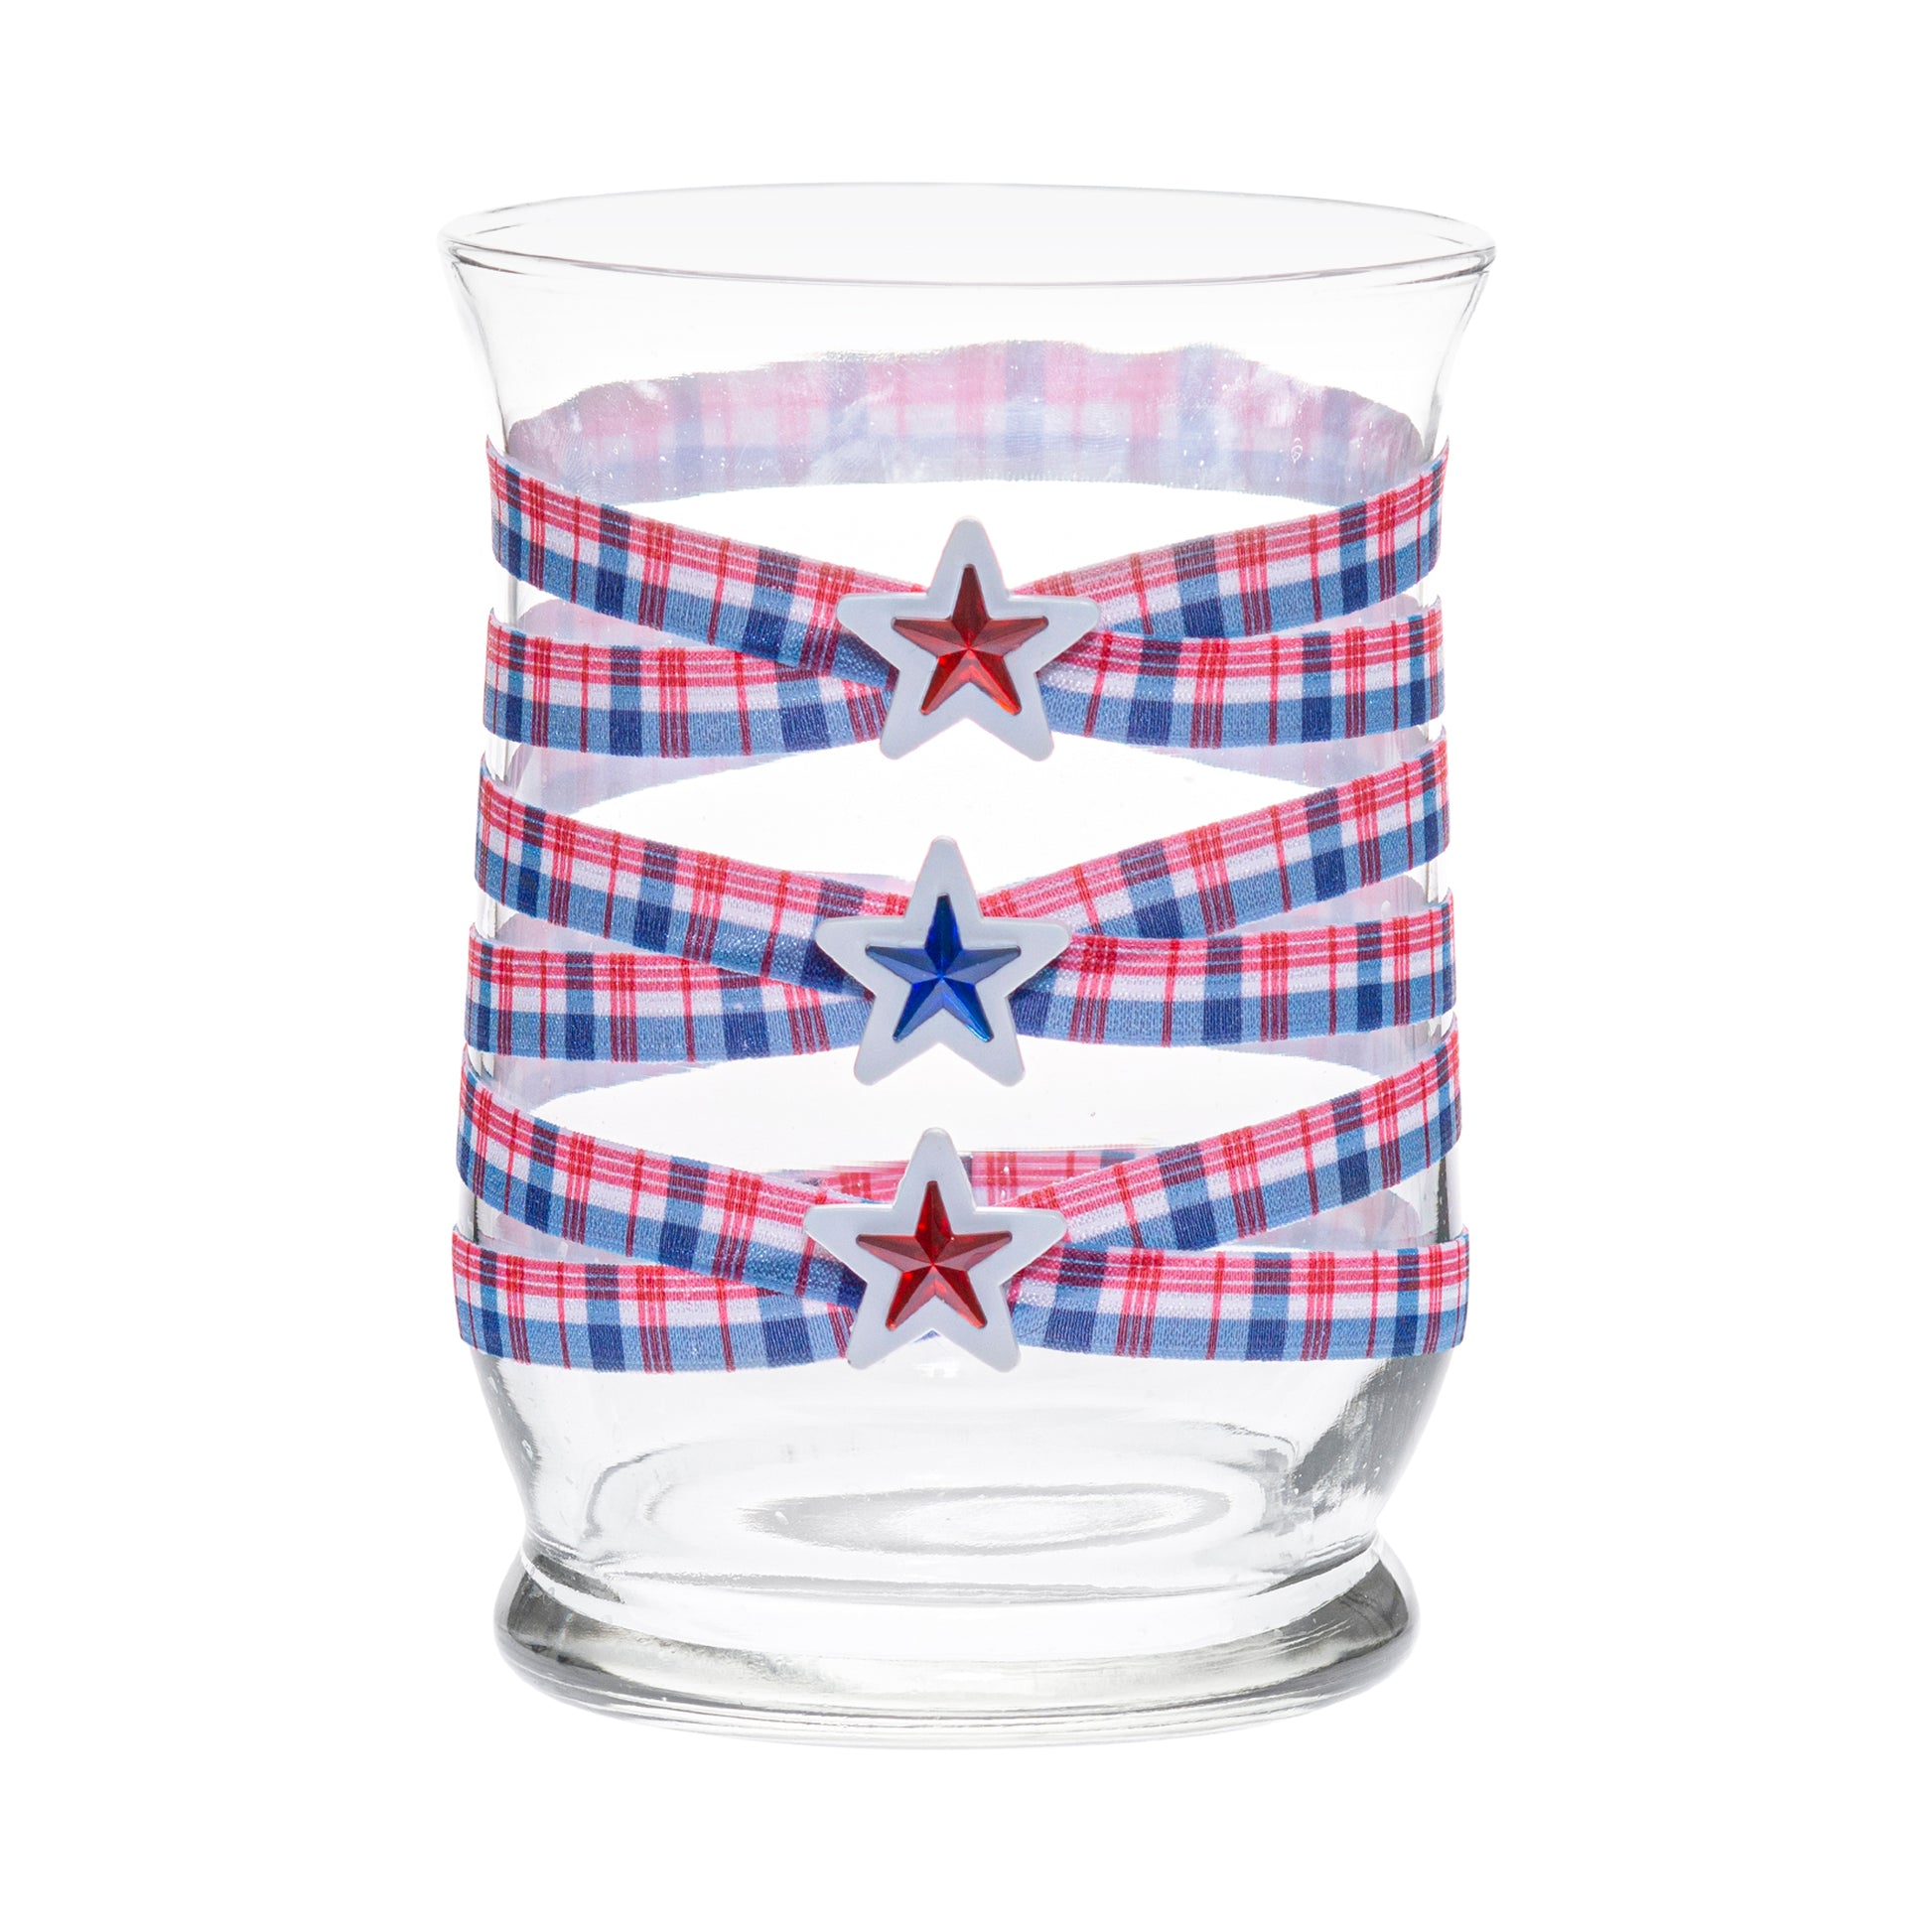 Front of Glass Wrappings 8" hurricane vase wrapped in red, white, and blue plaid elastic, decorated with red and blue gem stars.